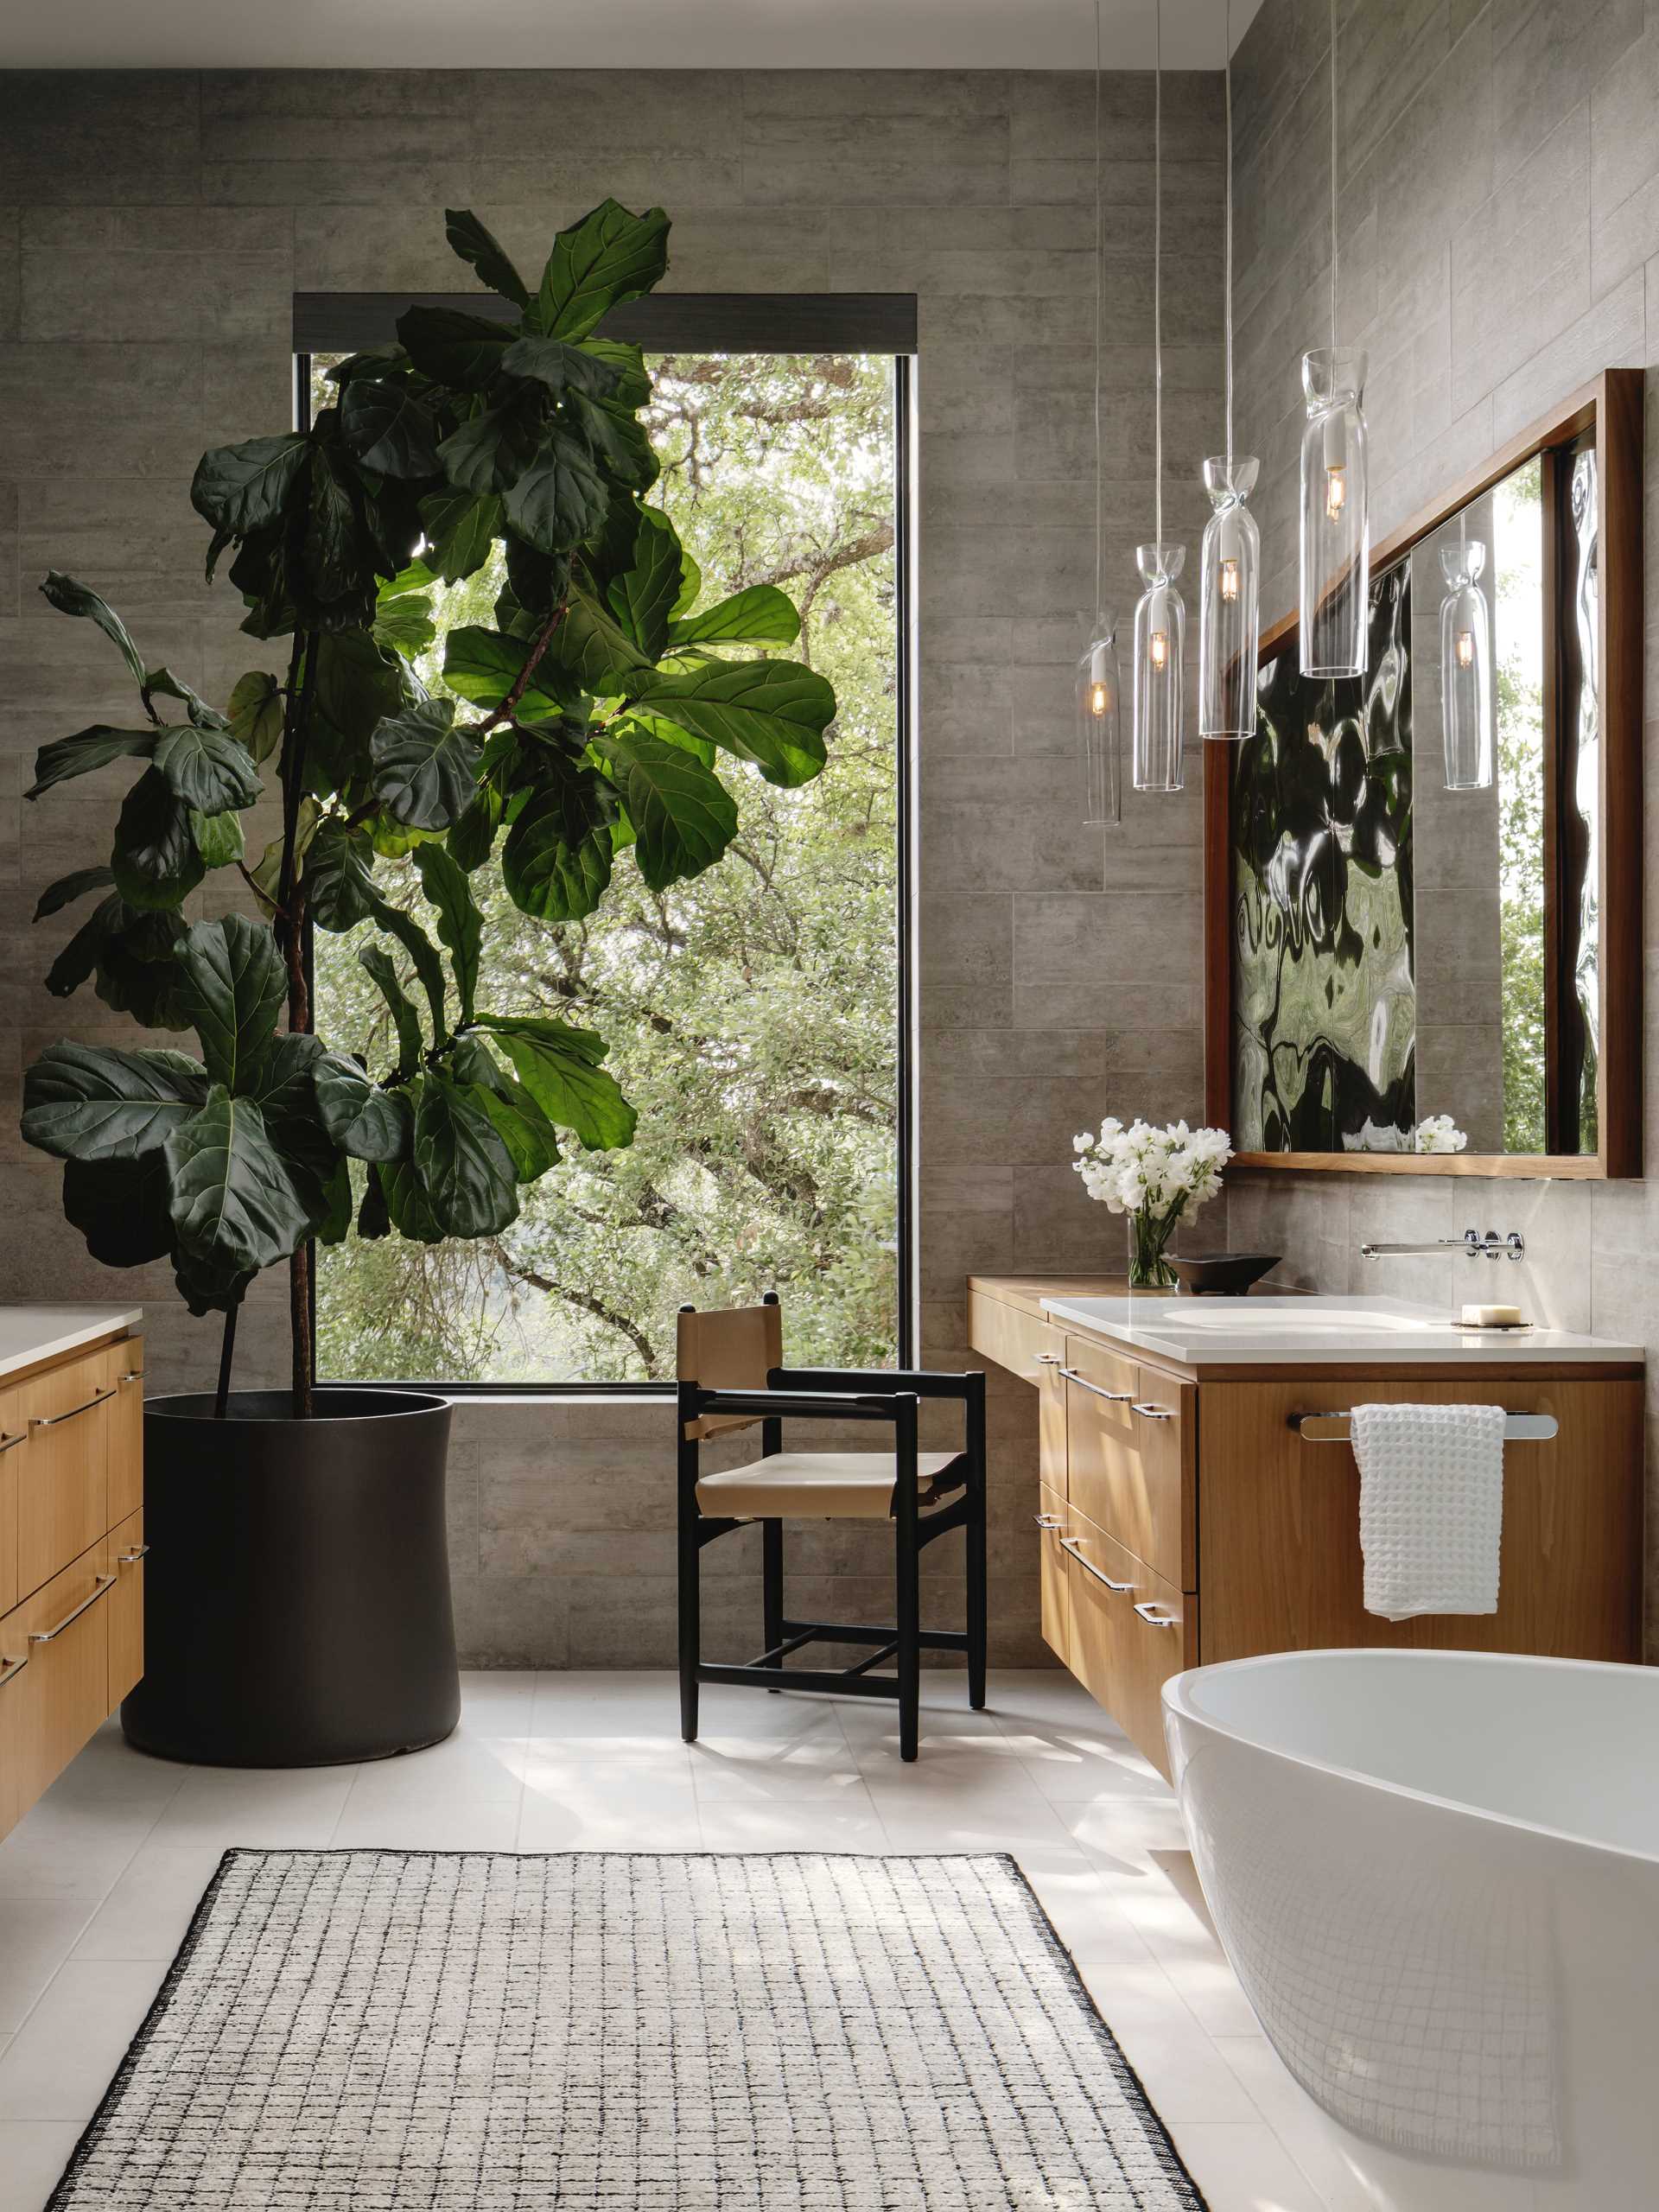 In one of the bathrooms, vanities are featured on each wall, while a large window adds natural light.